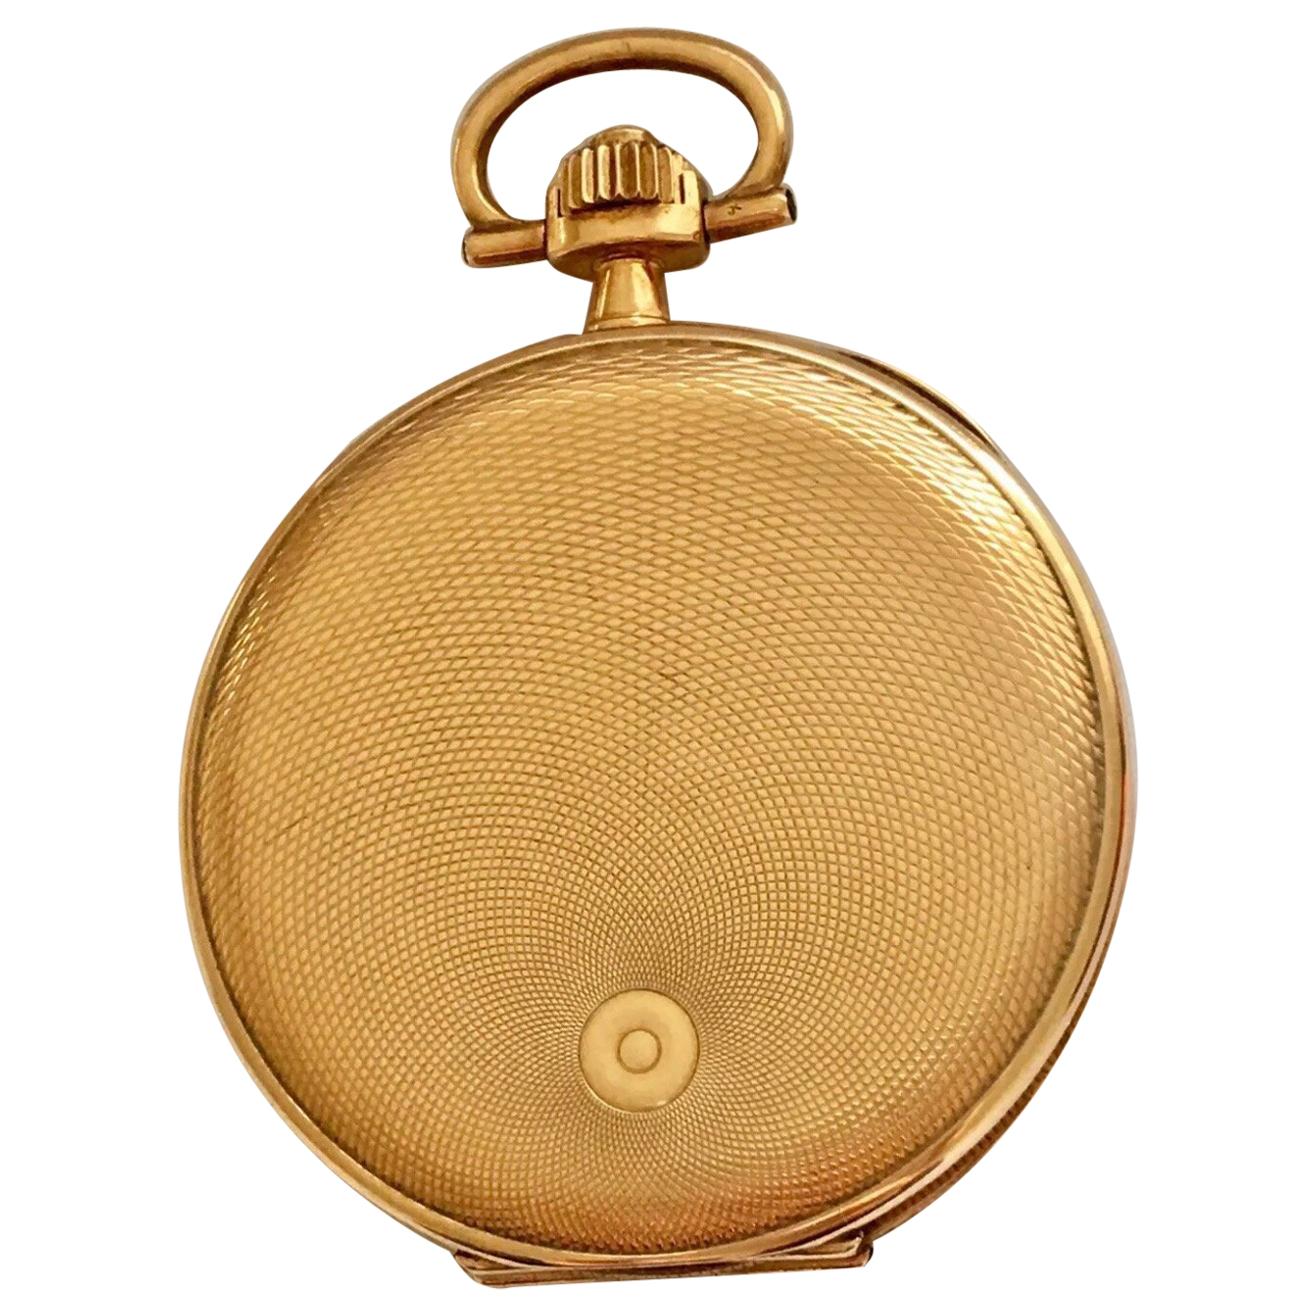 This very fine antique dress pocket watch features a double full hunter case with elegant engine turned decoration. With its beautiful gold dial and numeric numbers and a seconds sub-dial. The movement is stem wound, stem set, completely gilt The